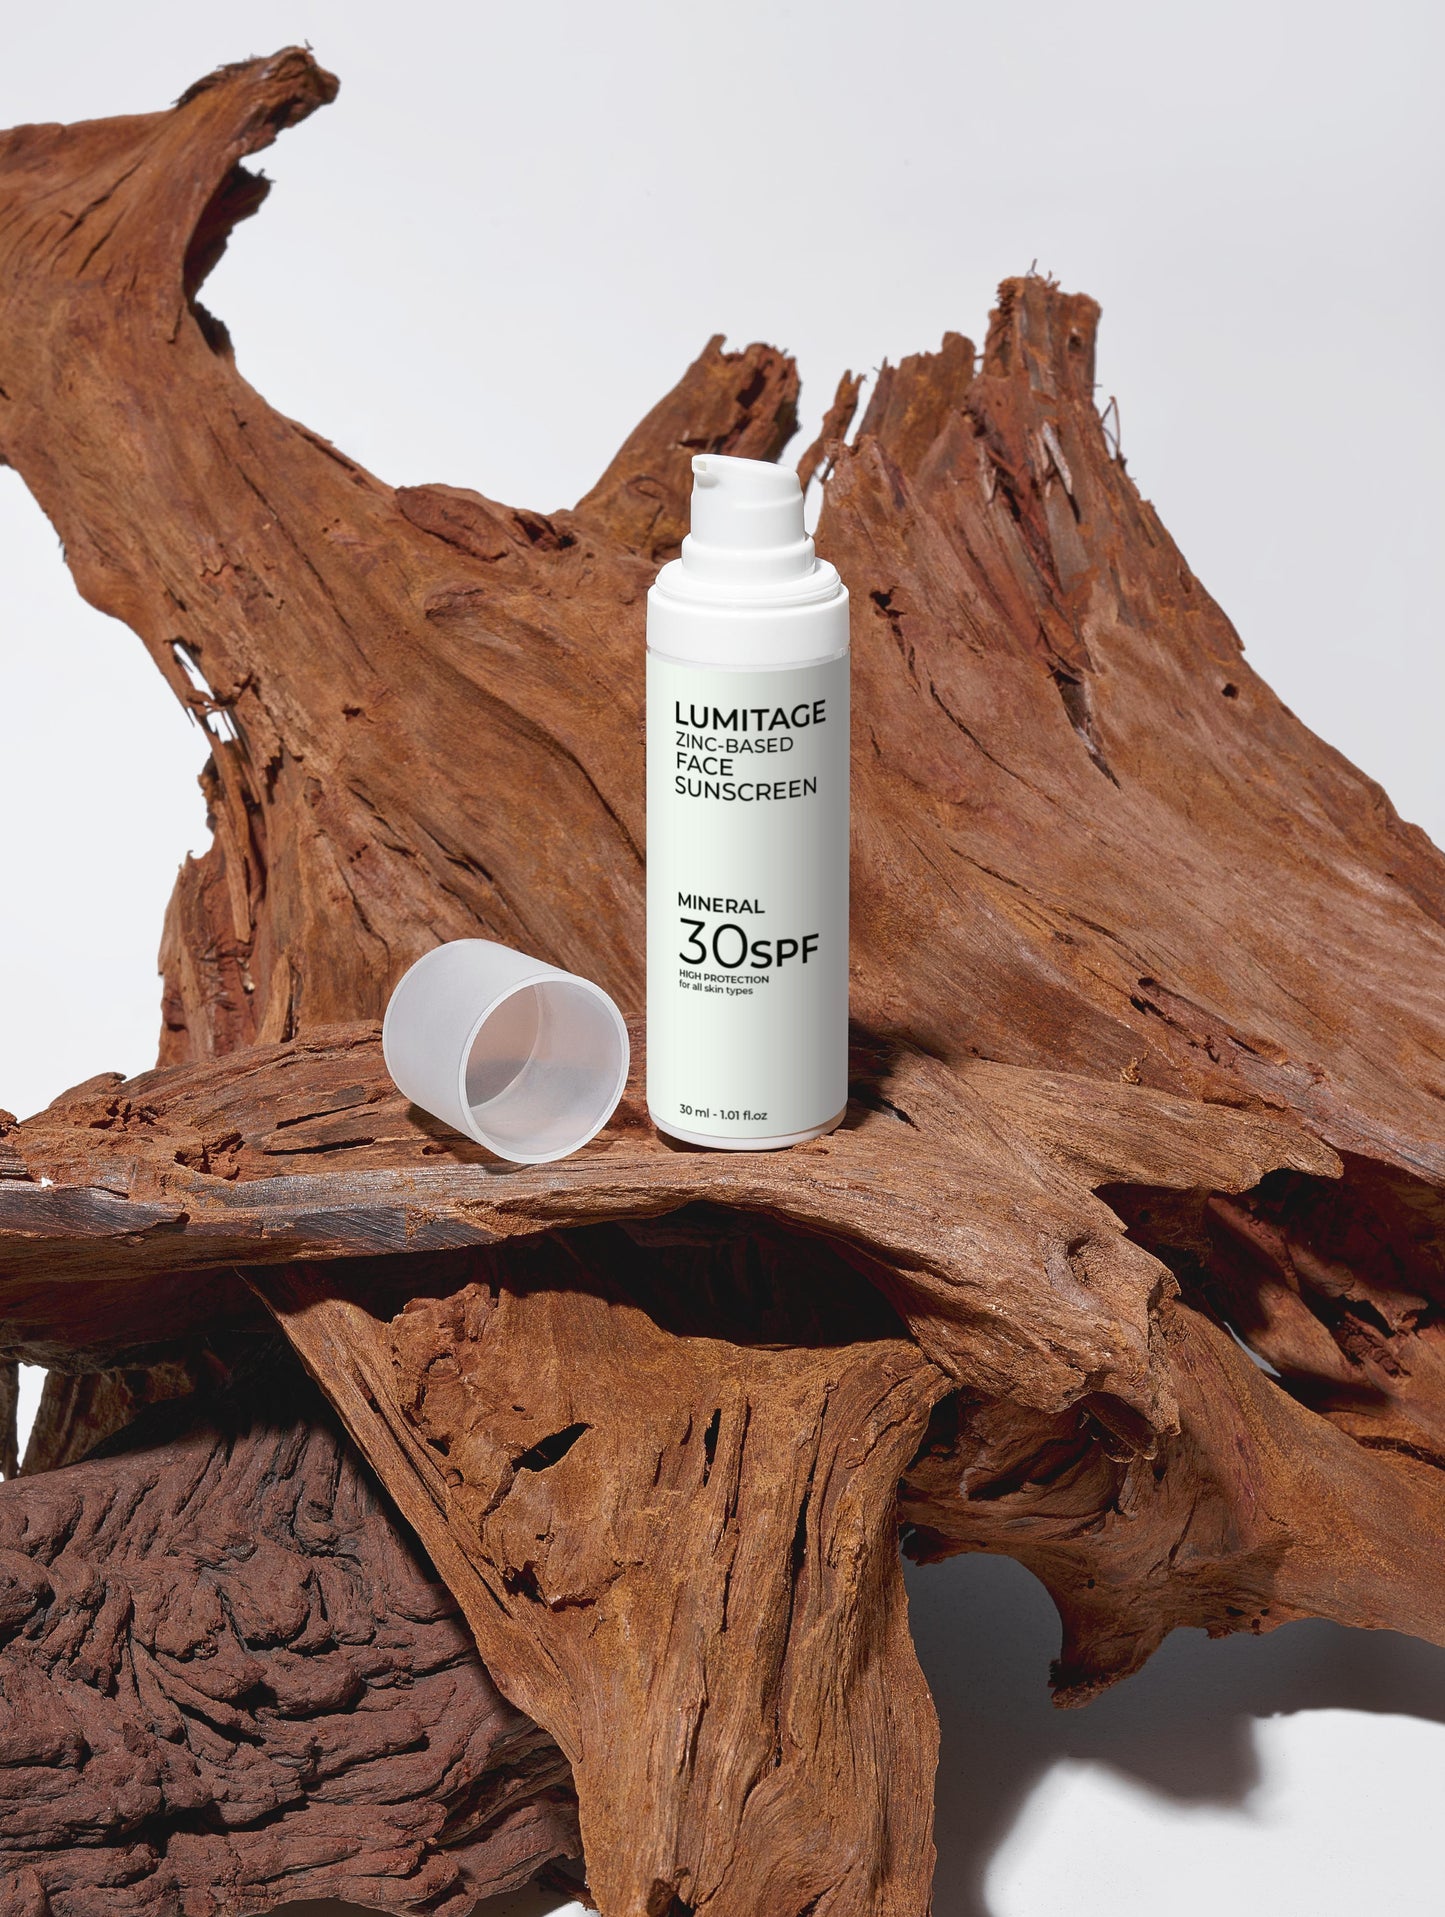 Lumitage Sunscreen - Our sunscreen in a new red wood environment.